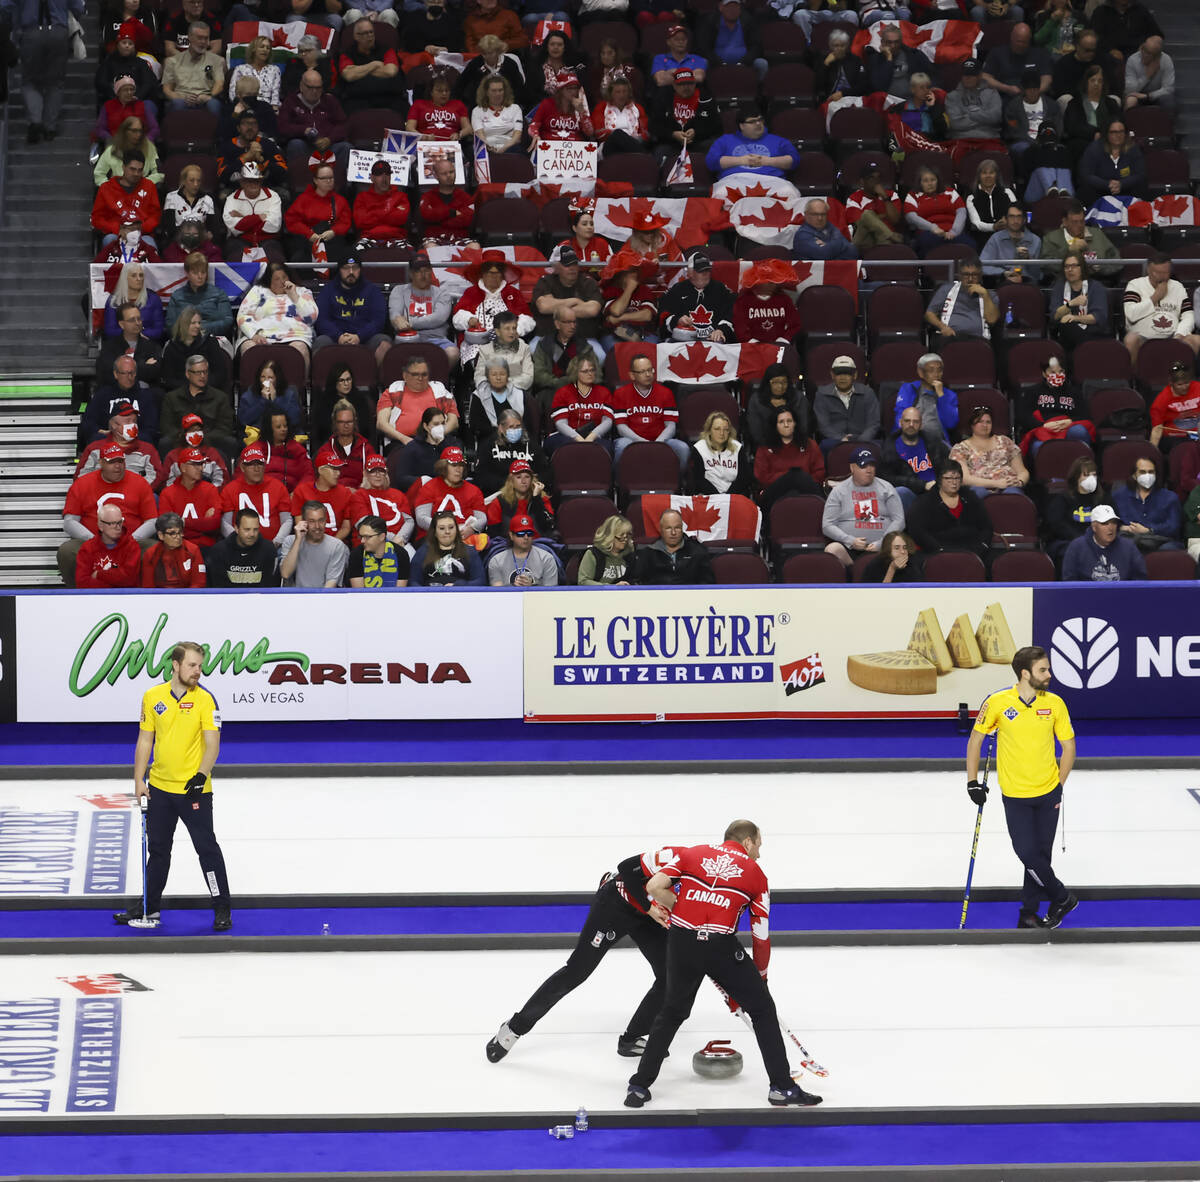 Curling fans watch as Canada takes on Sweden in the gold medal game of the LGT World Men's Curl ...